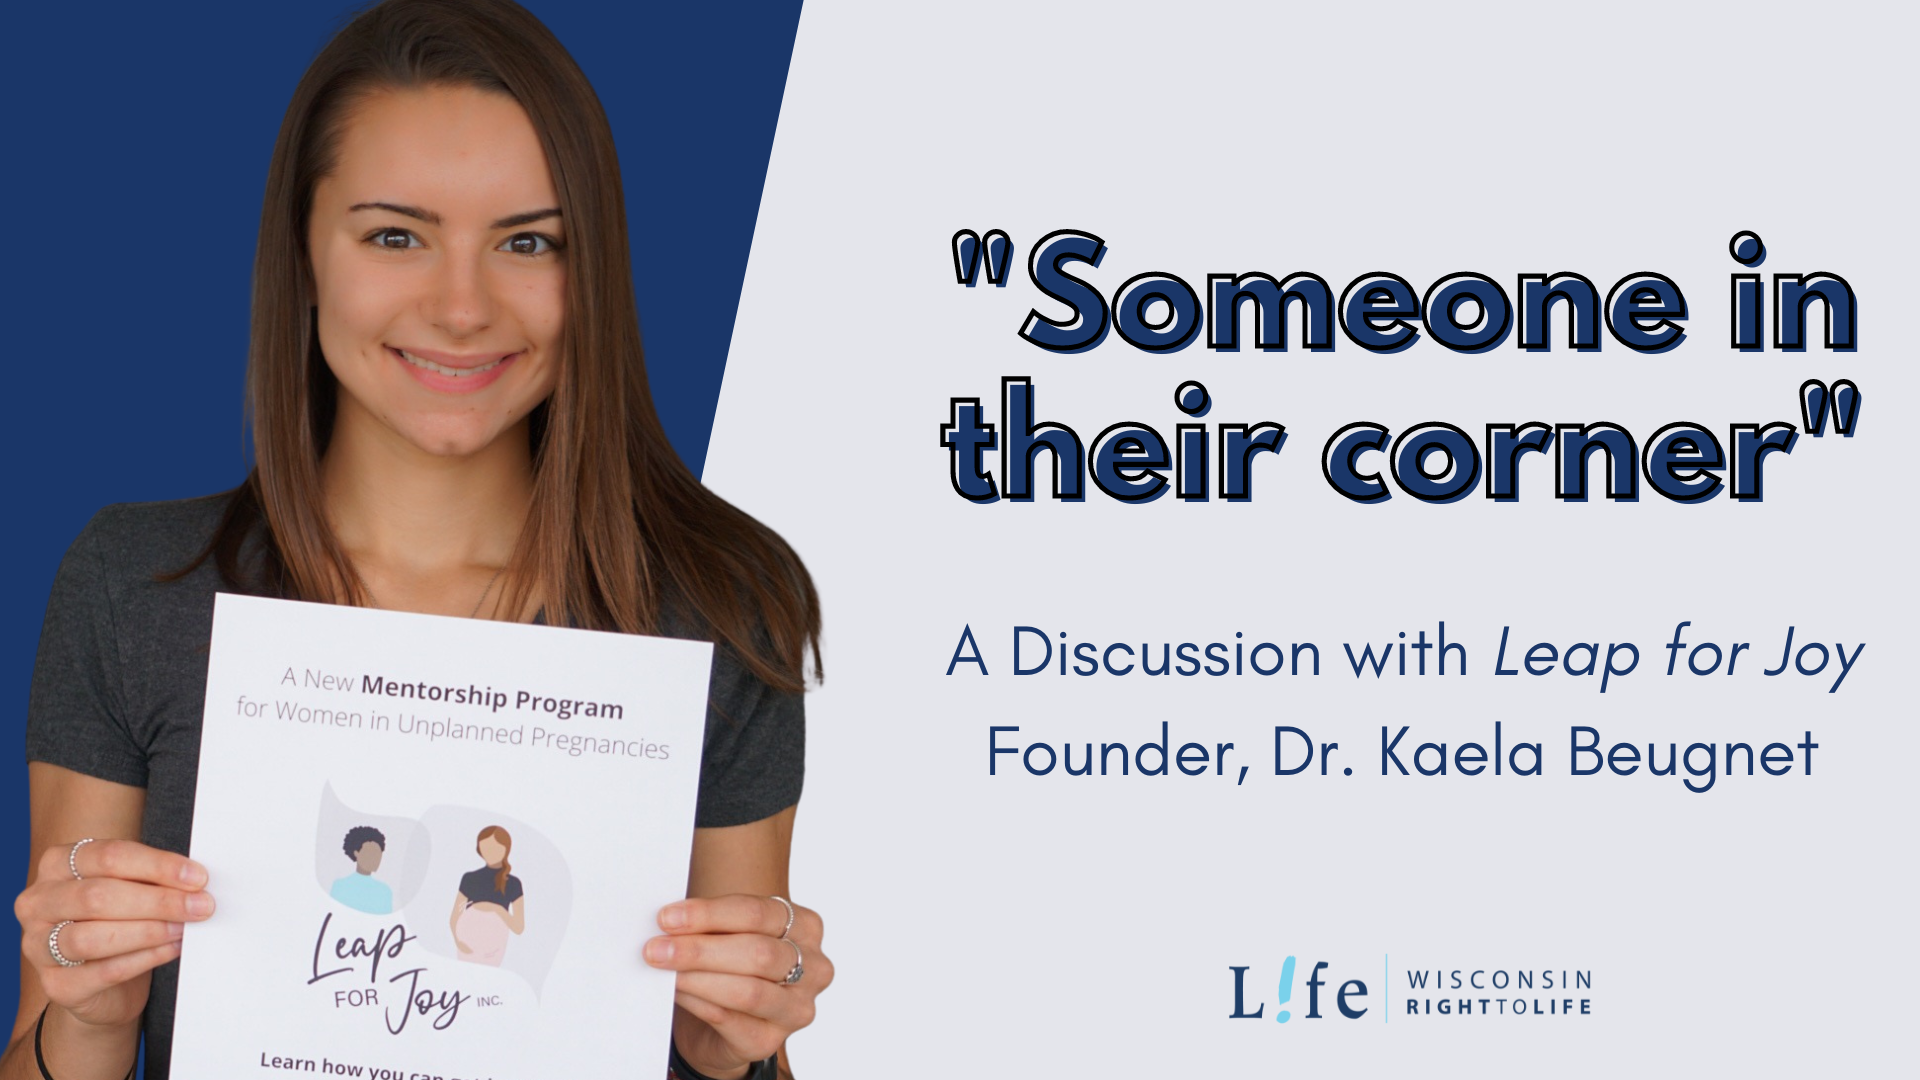 “Someone in their Corner”: A Discussion with Leap for Joy Founder, Dr. Kaela Beugnet